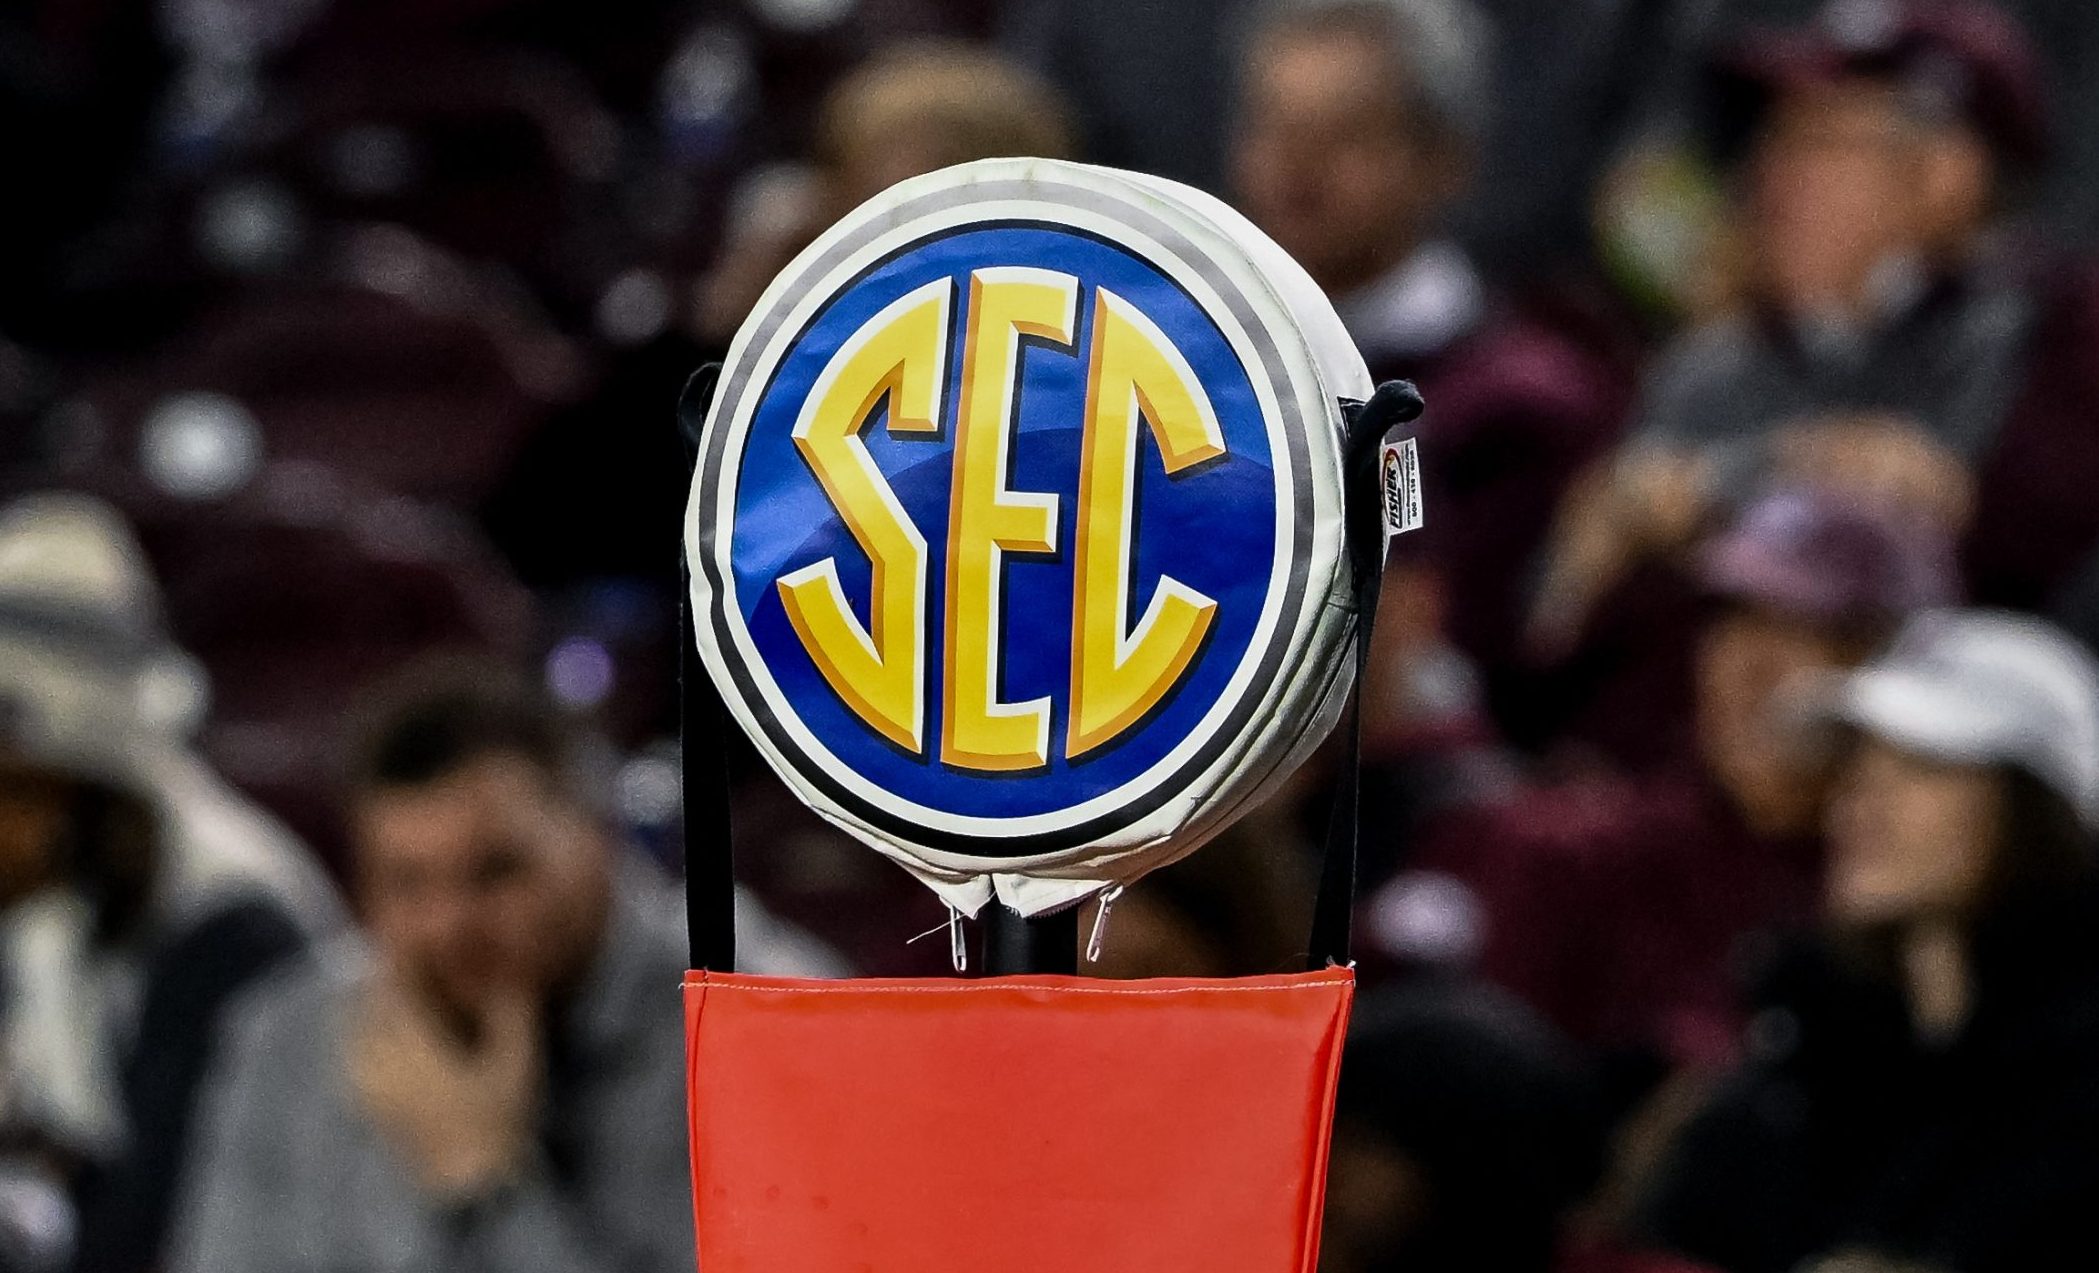 sec coach calls out teams for 'buying' players